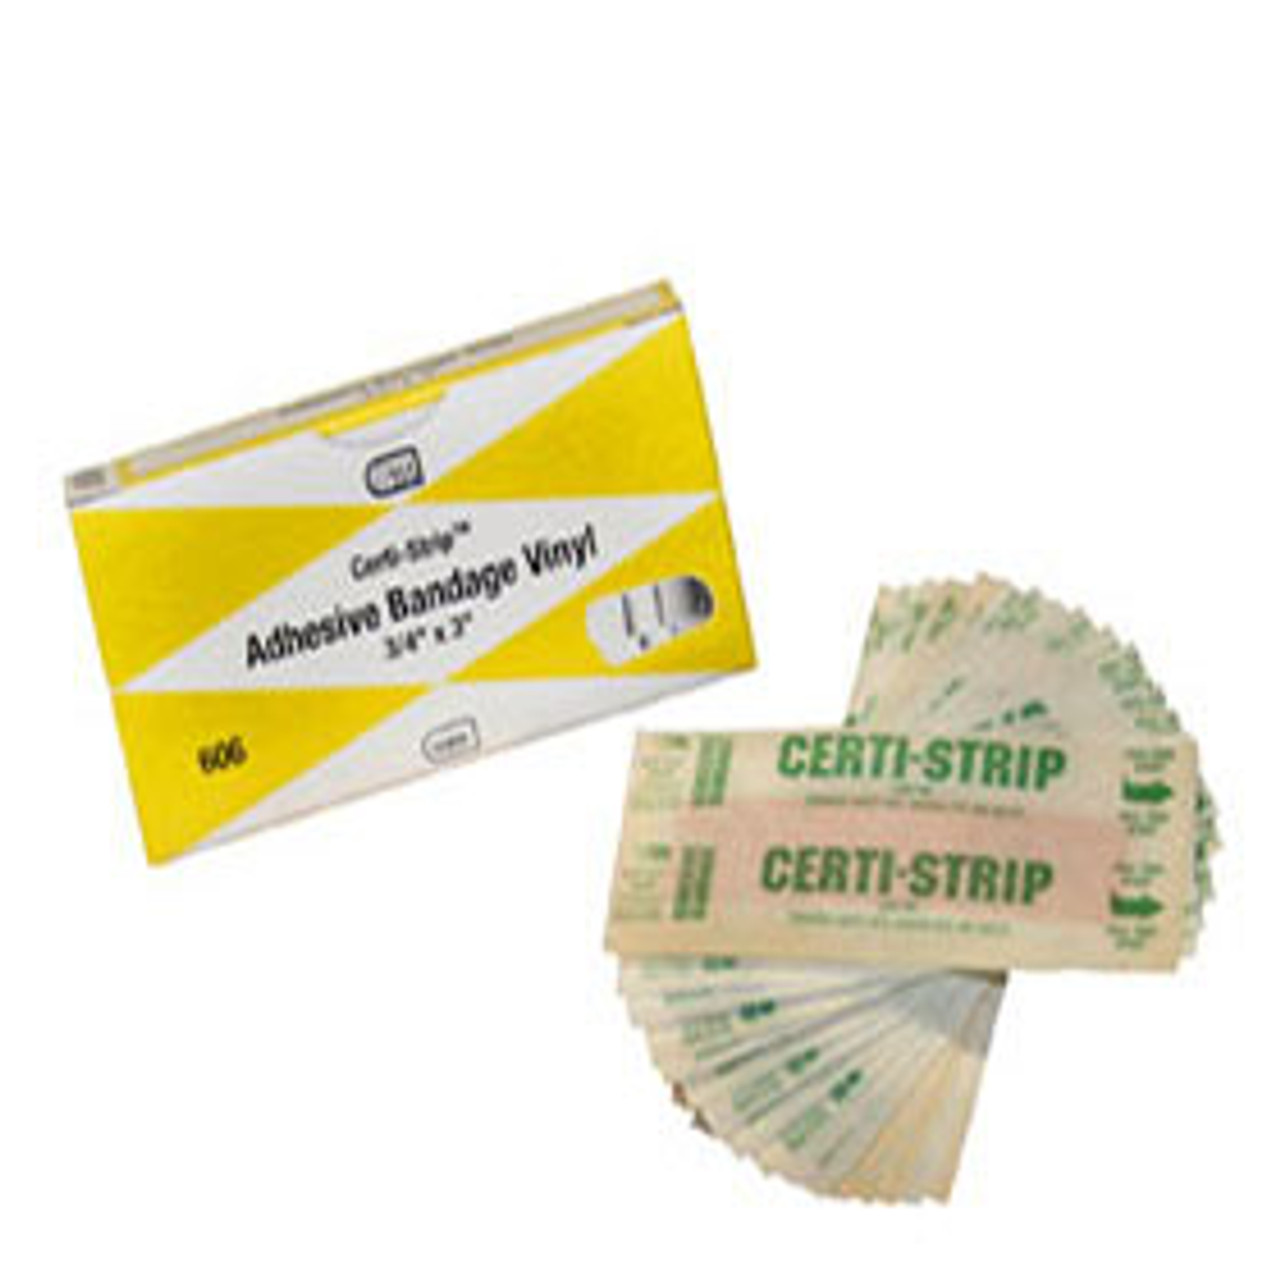 Certi-Strip Plastic Adhesive Bandage, 3/4-inch by 3-inch